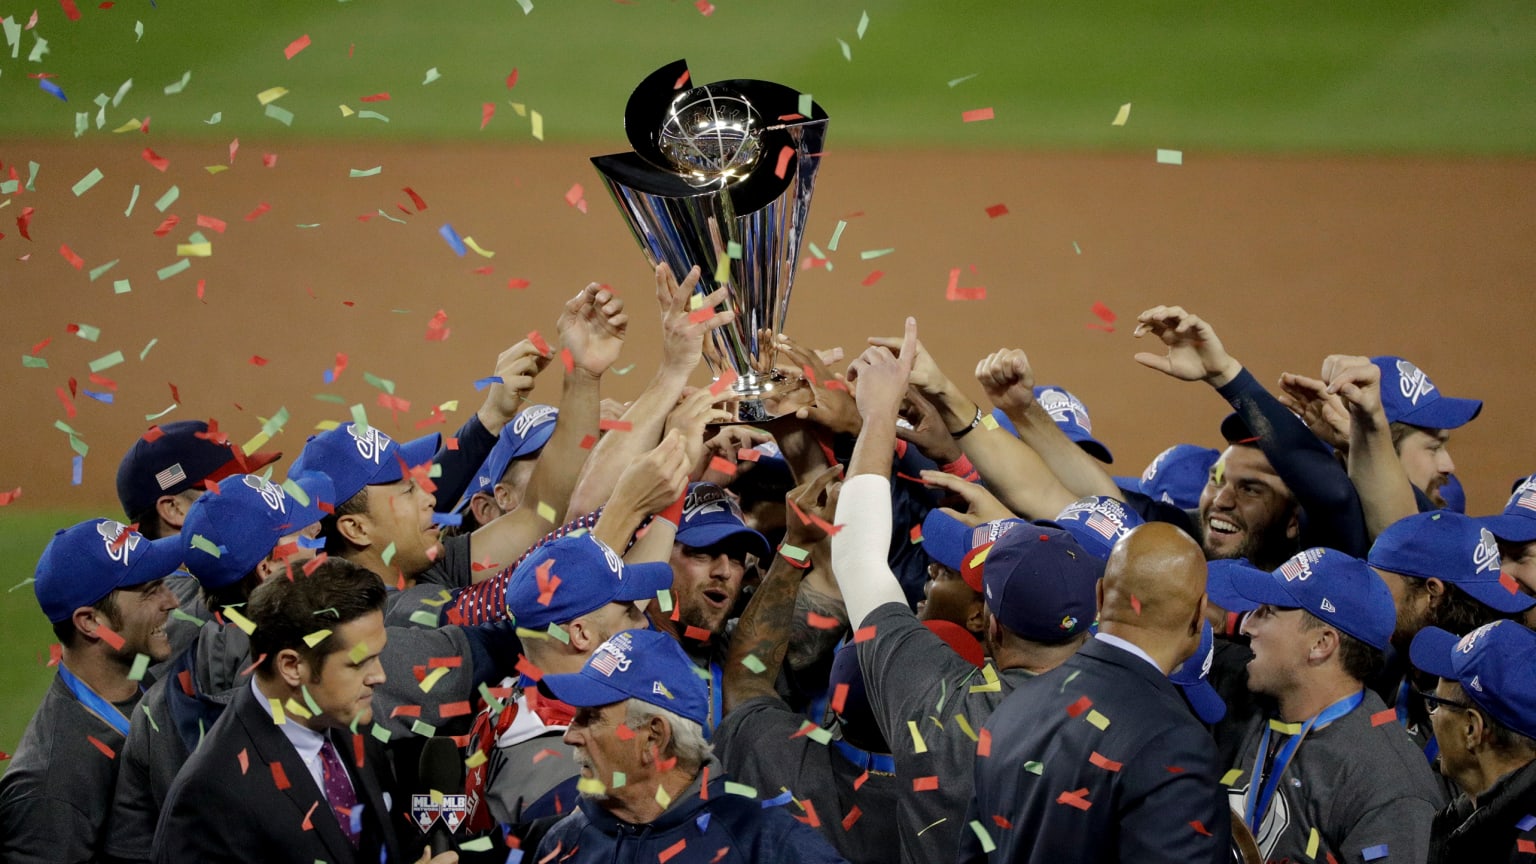 Players hold up a trophy as confetti falls around them